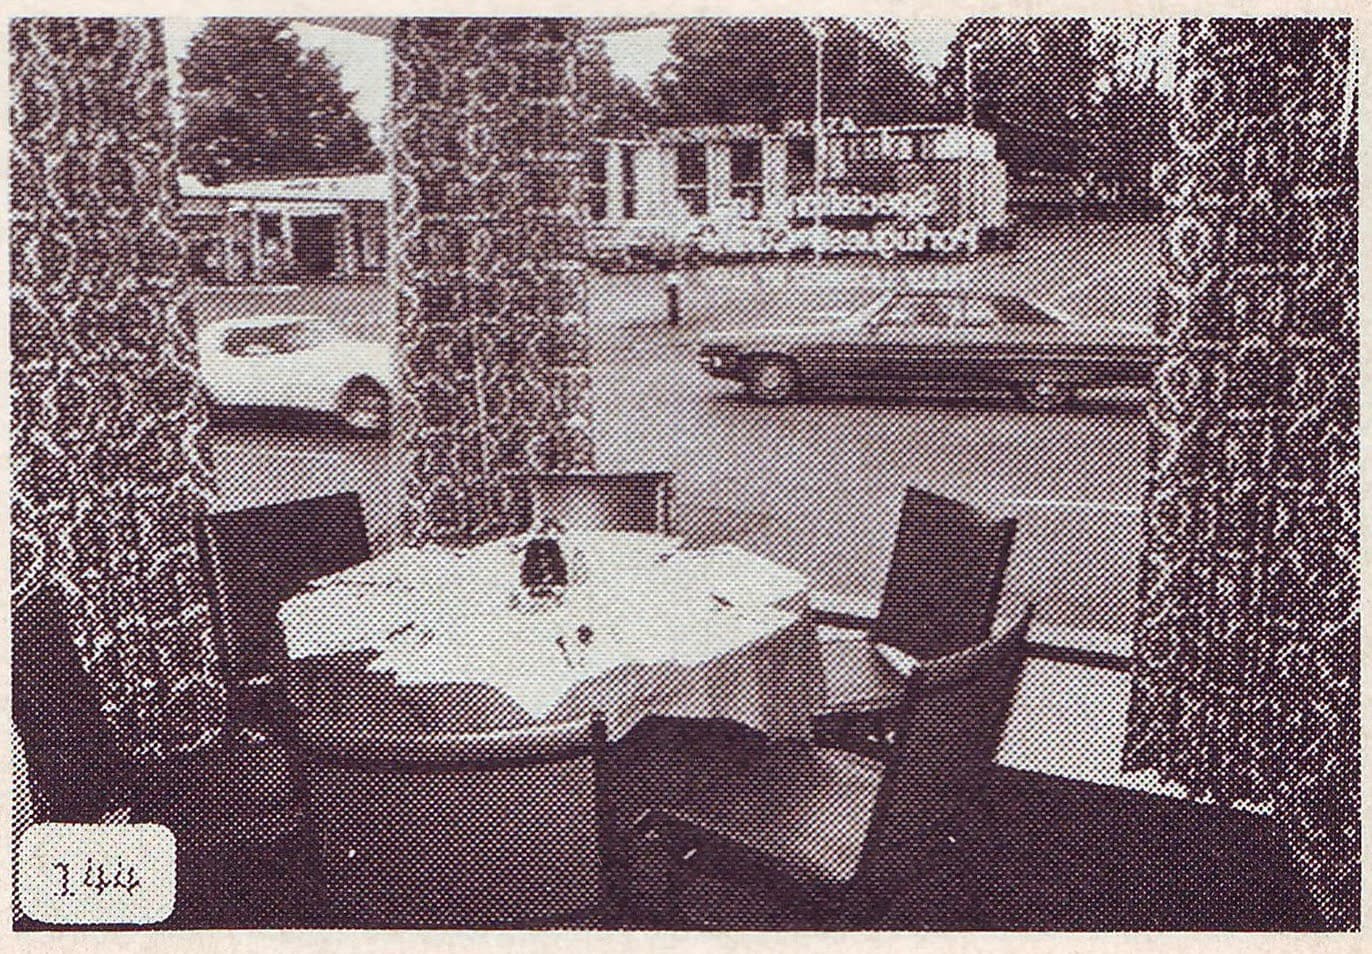 The front table at Sagres (from “The Key Ottawa/Hull 1979”)